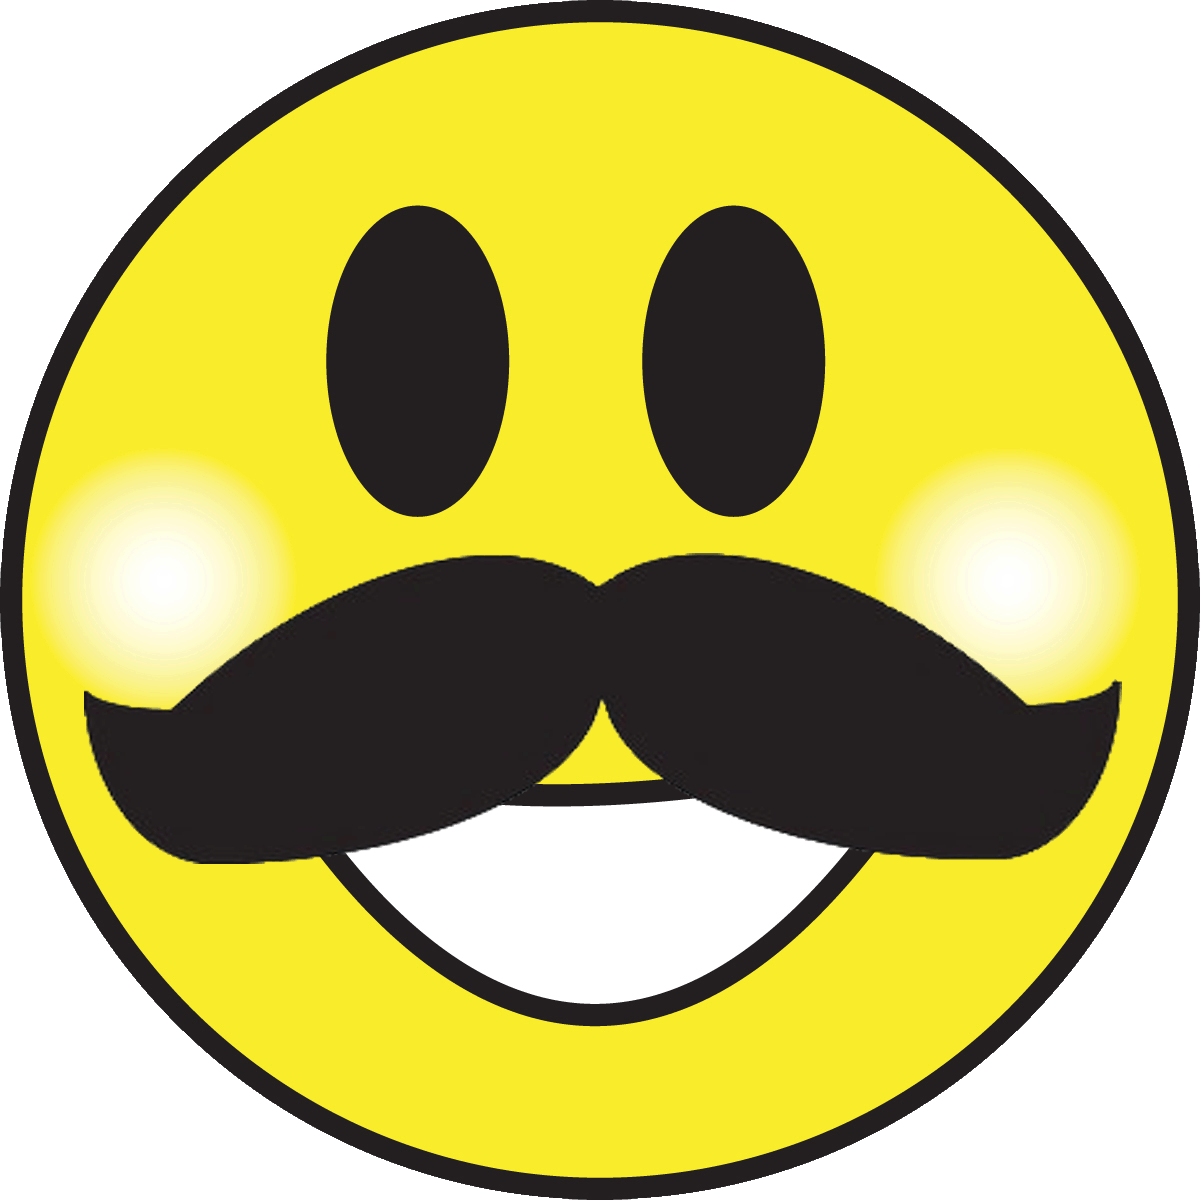 15 Funny Cartoon Smiley Faces Free Cliparts That You Can Download To